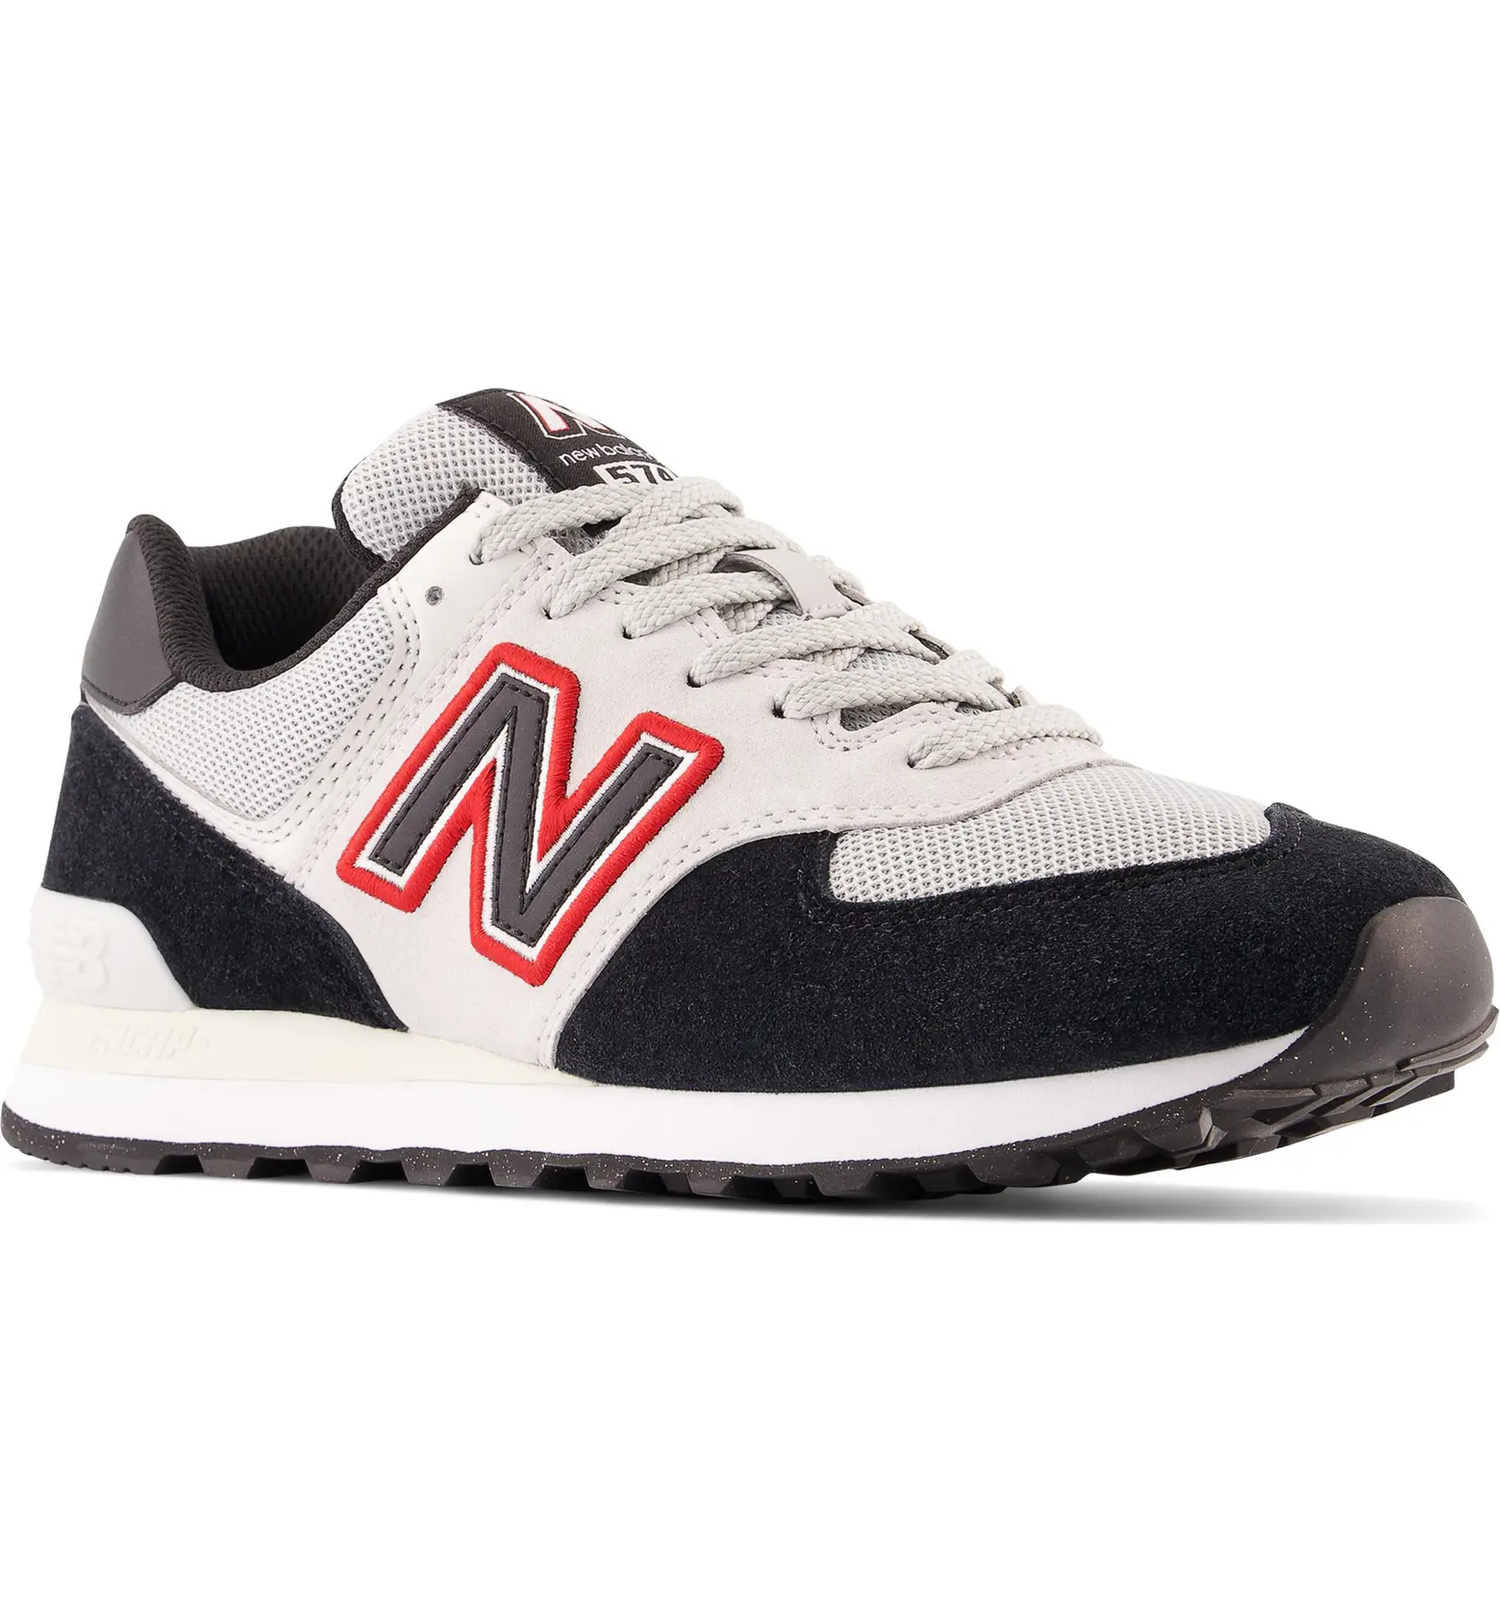 Save Up To 37% Off New Balance 574 Colorways — Kicks Under Cost